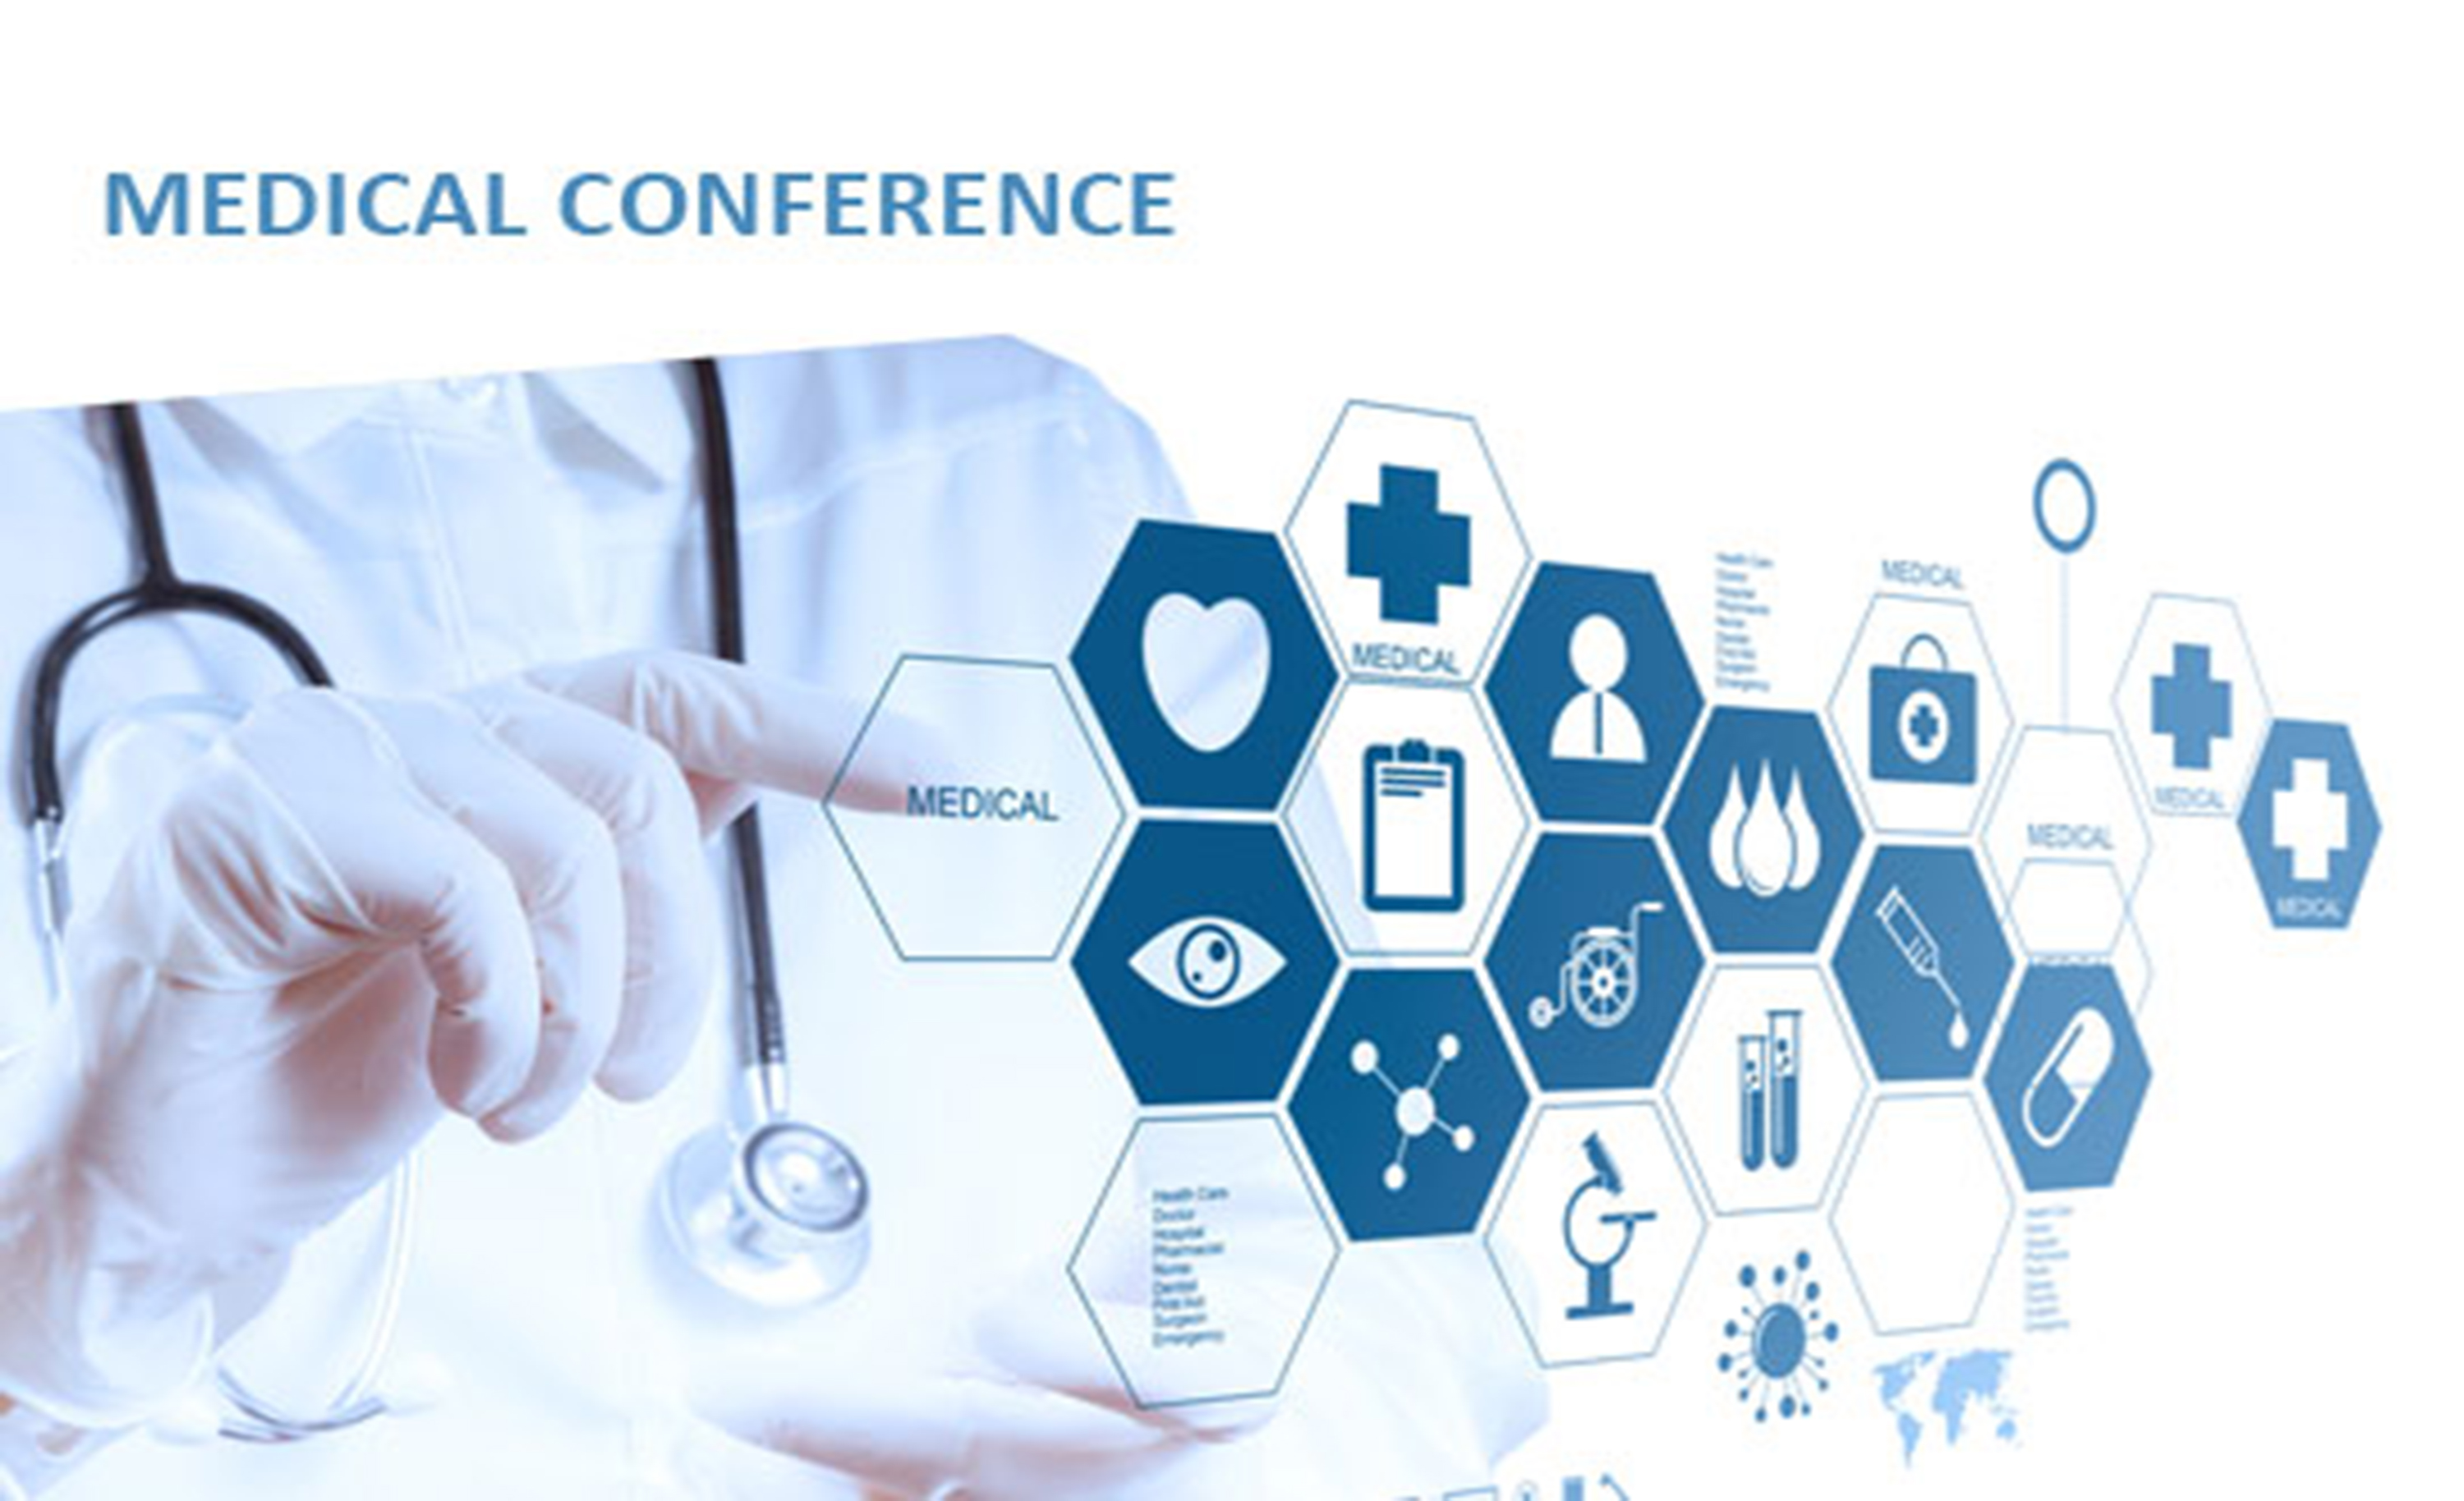 http://ptscout.com/wp-content/uploads/2015/11/medical_conferencee.jpg